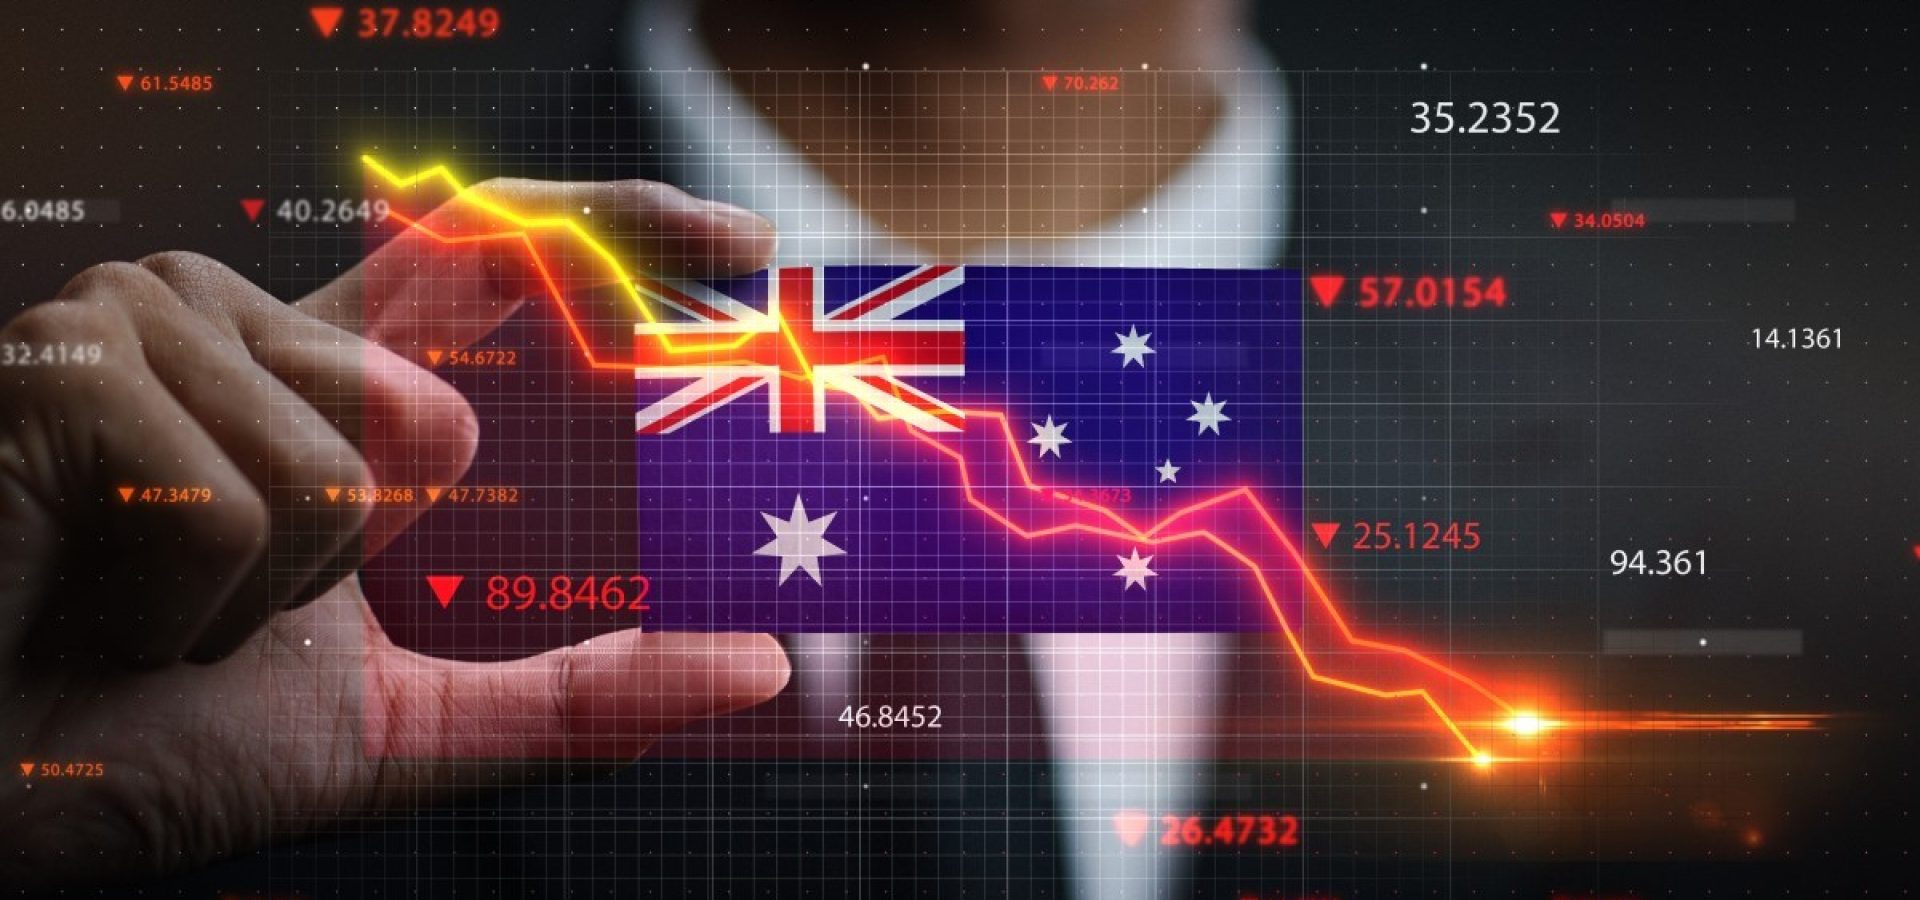 New restrictions will affect Australia's economy in Q3